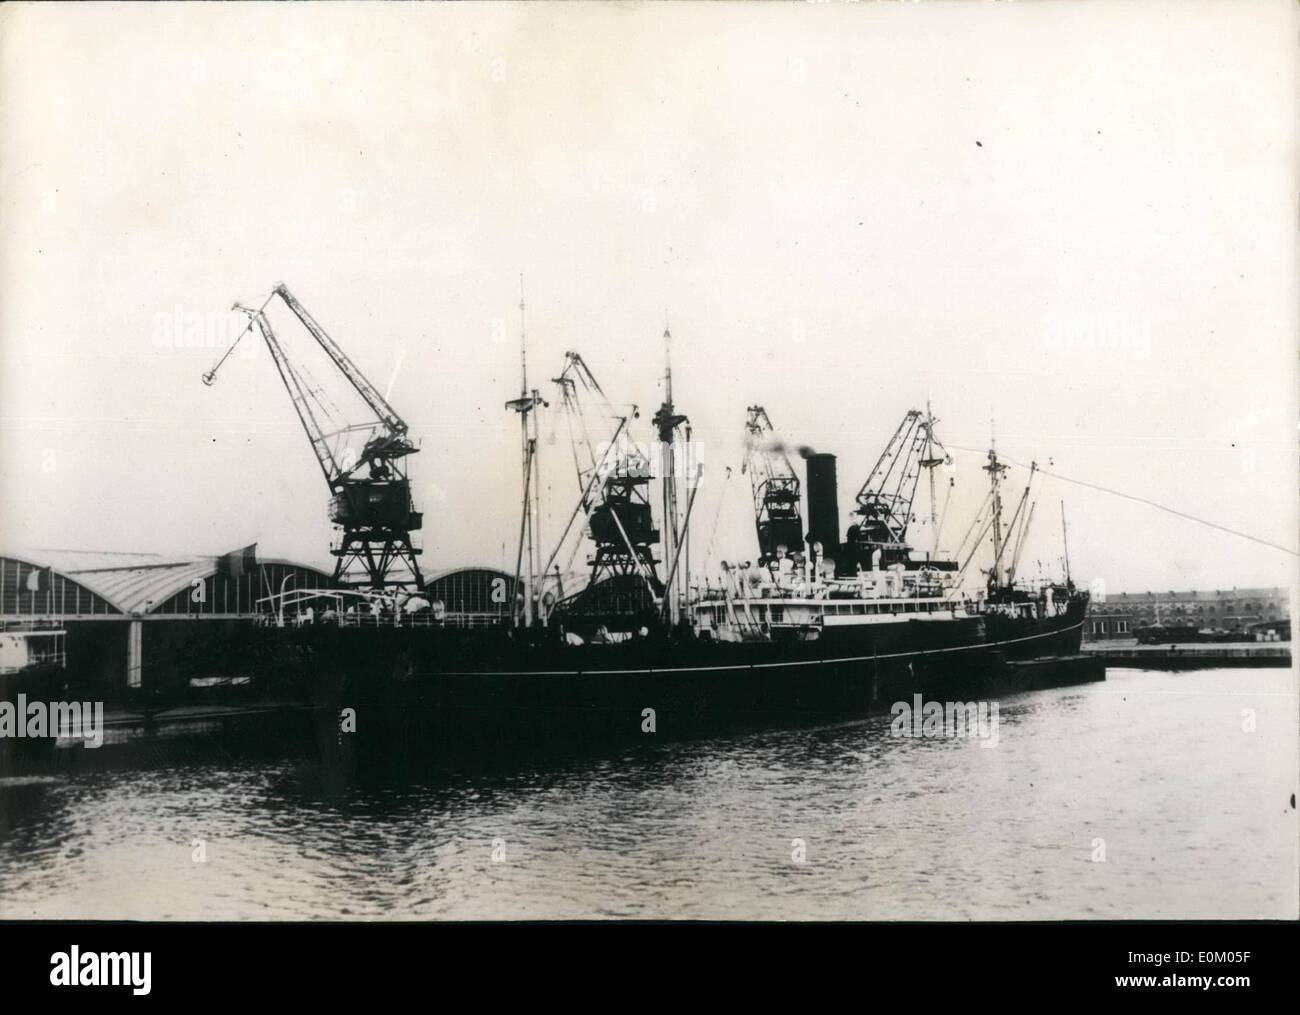 Feb. 02, 1953 - China-Bound Freight Ship Stopped at Dunkirk: The ''Yang ...